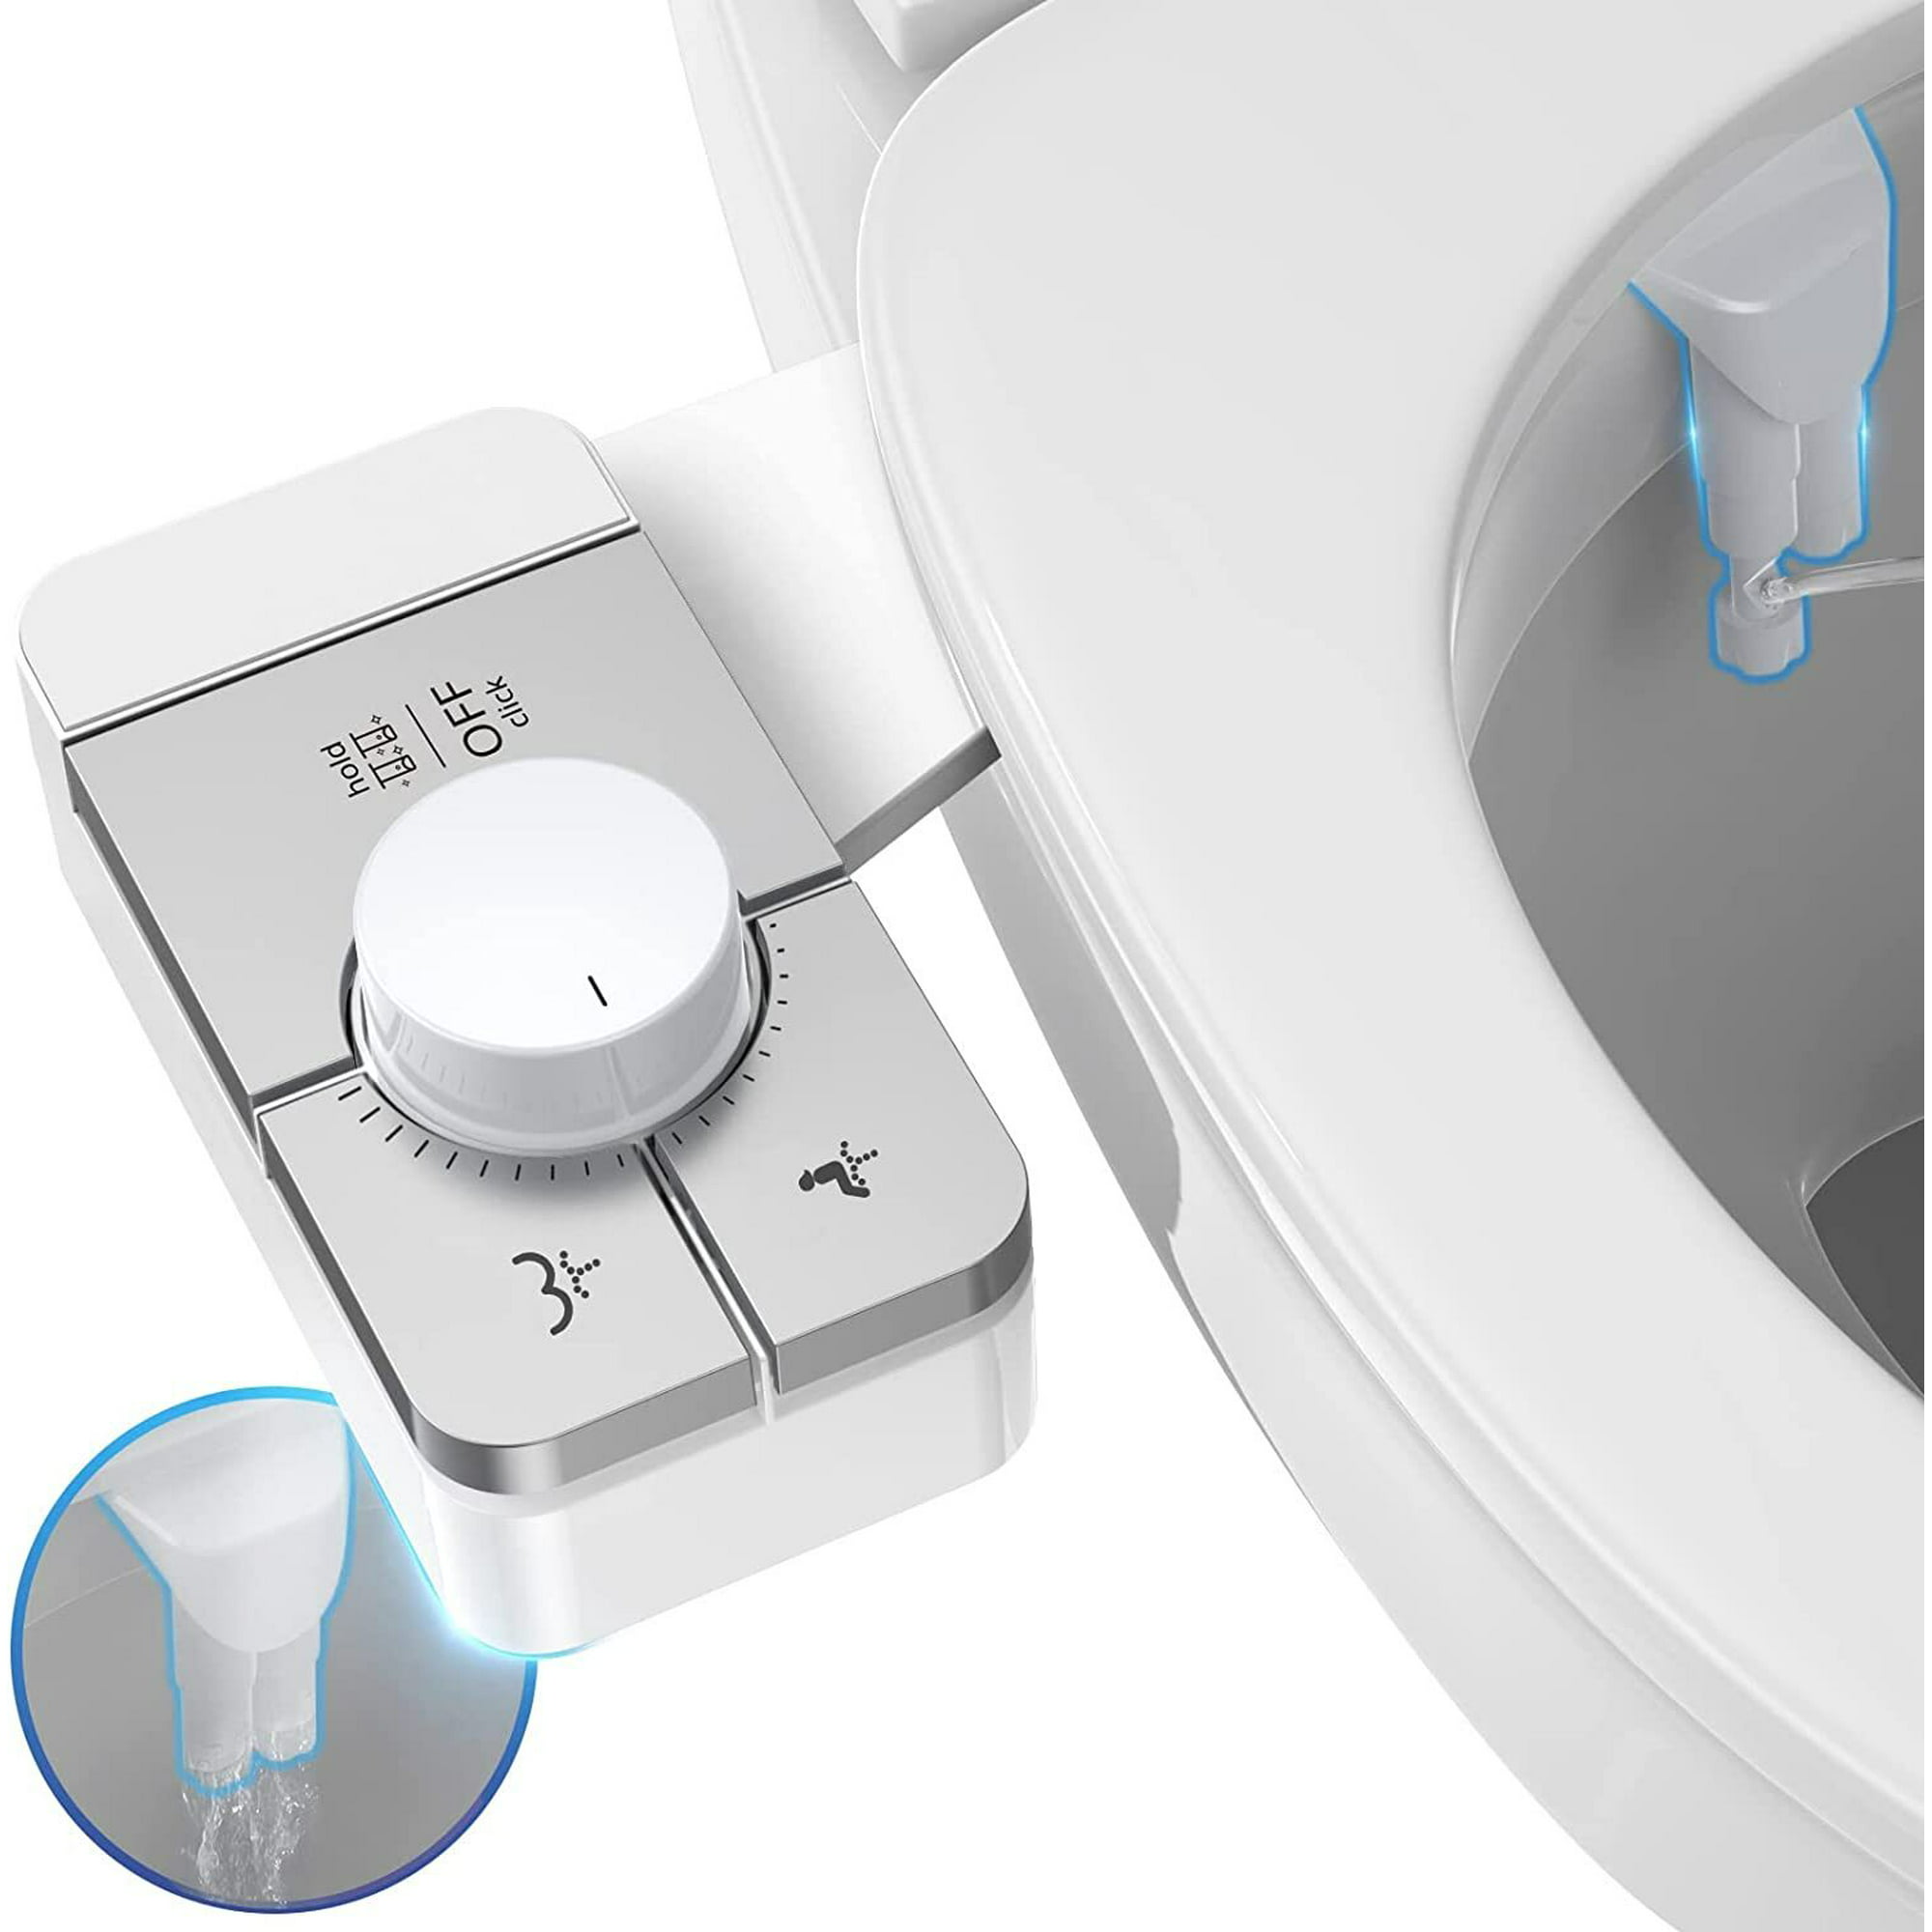 Veken Self-Cleaning Dual Nozzle Bidet Attachment for Toilet (Feminine/Posterior Wash) $19.20 + Free Shipping w/ Walmart+ or on $35+